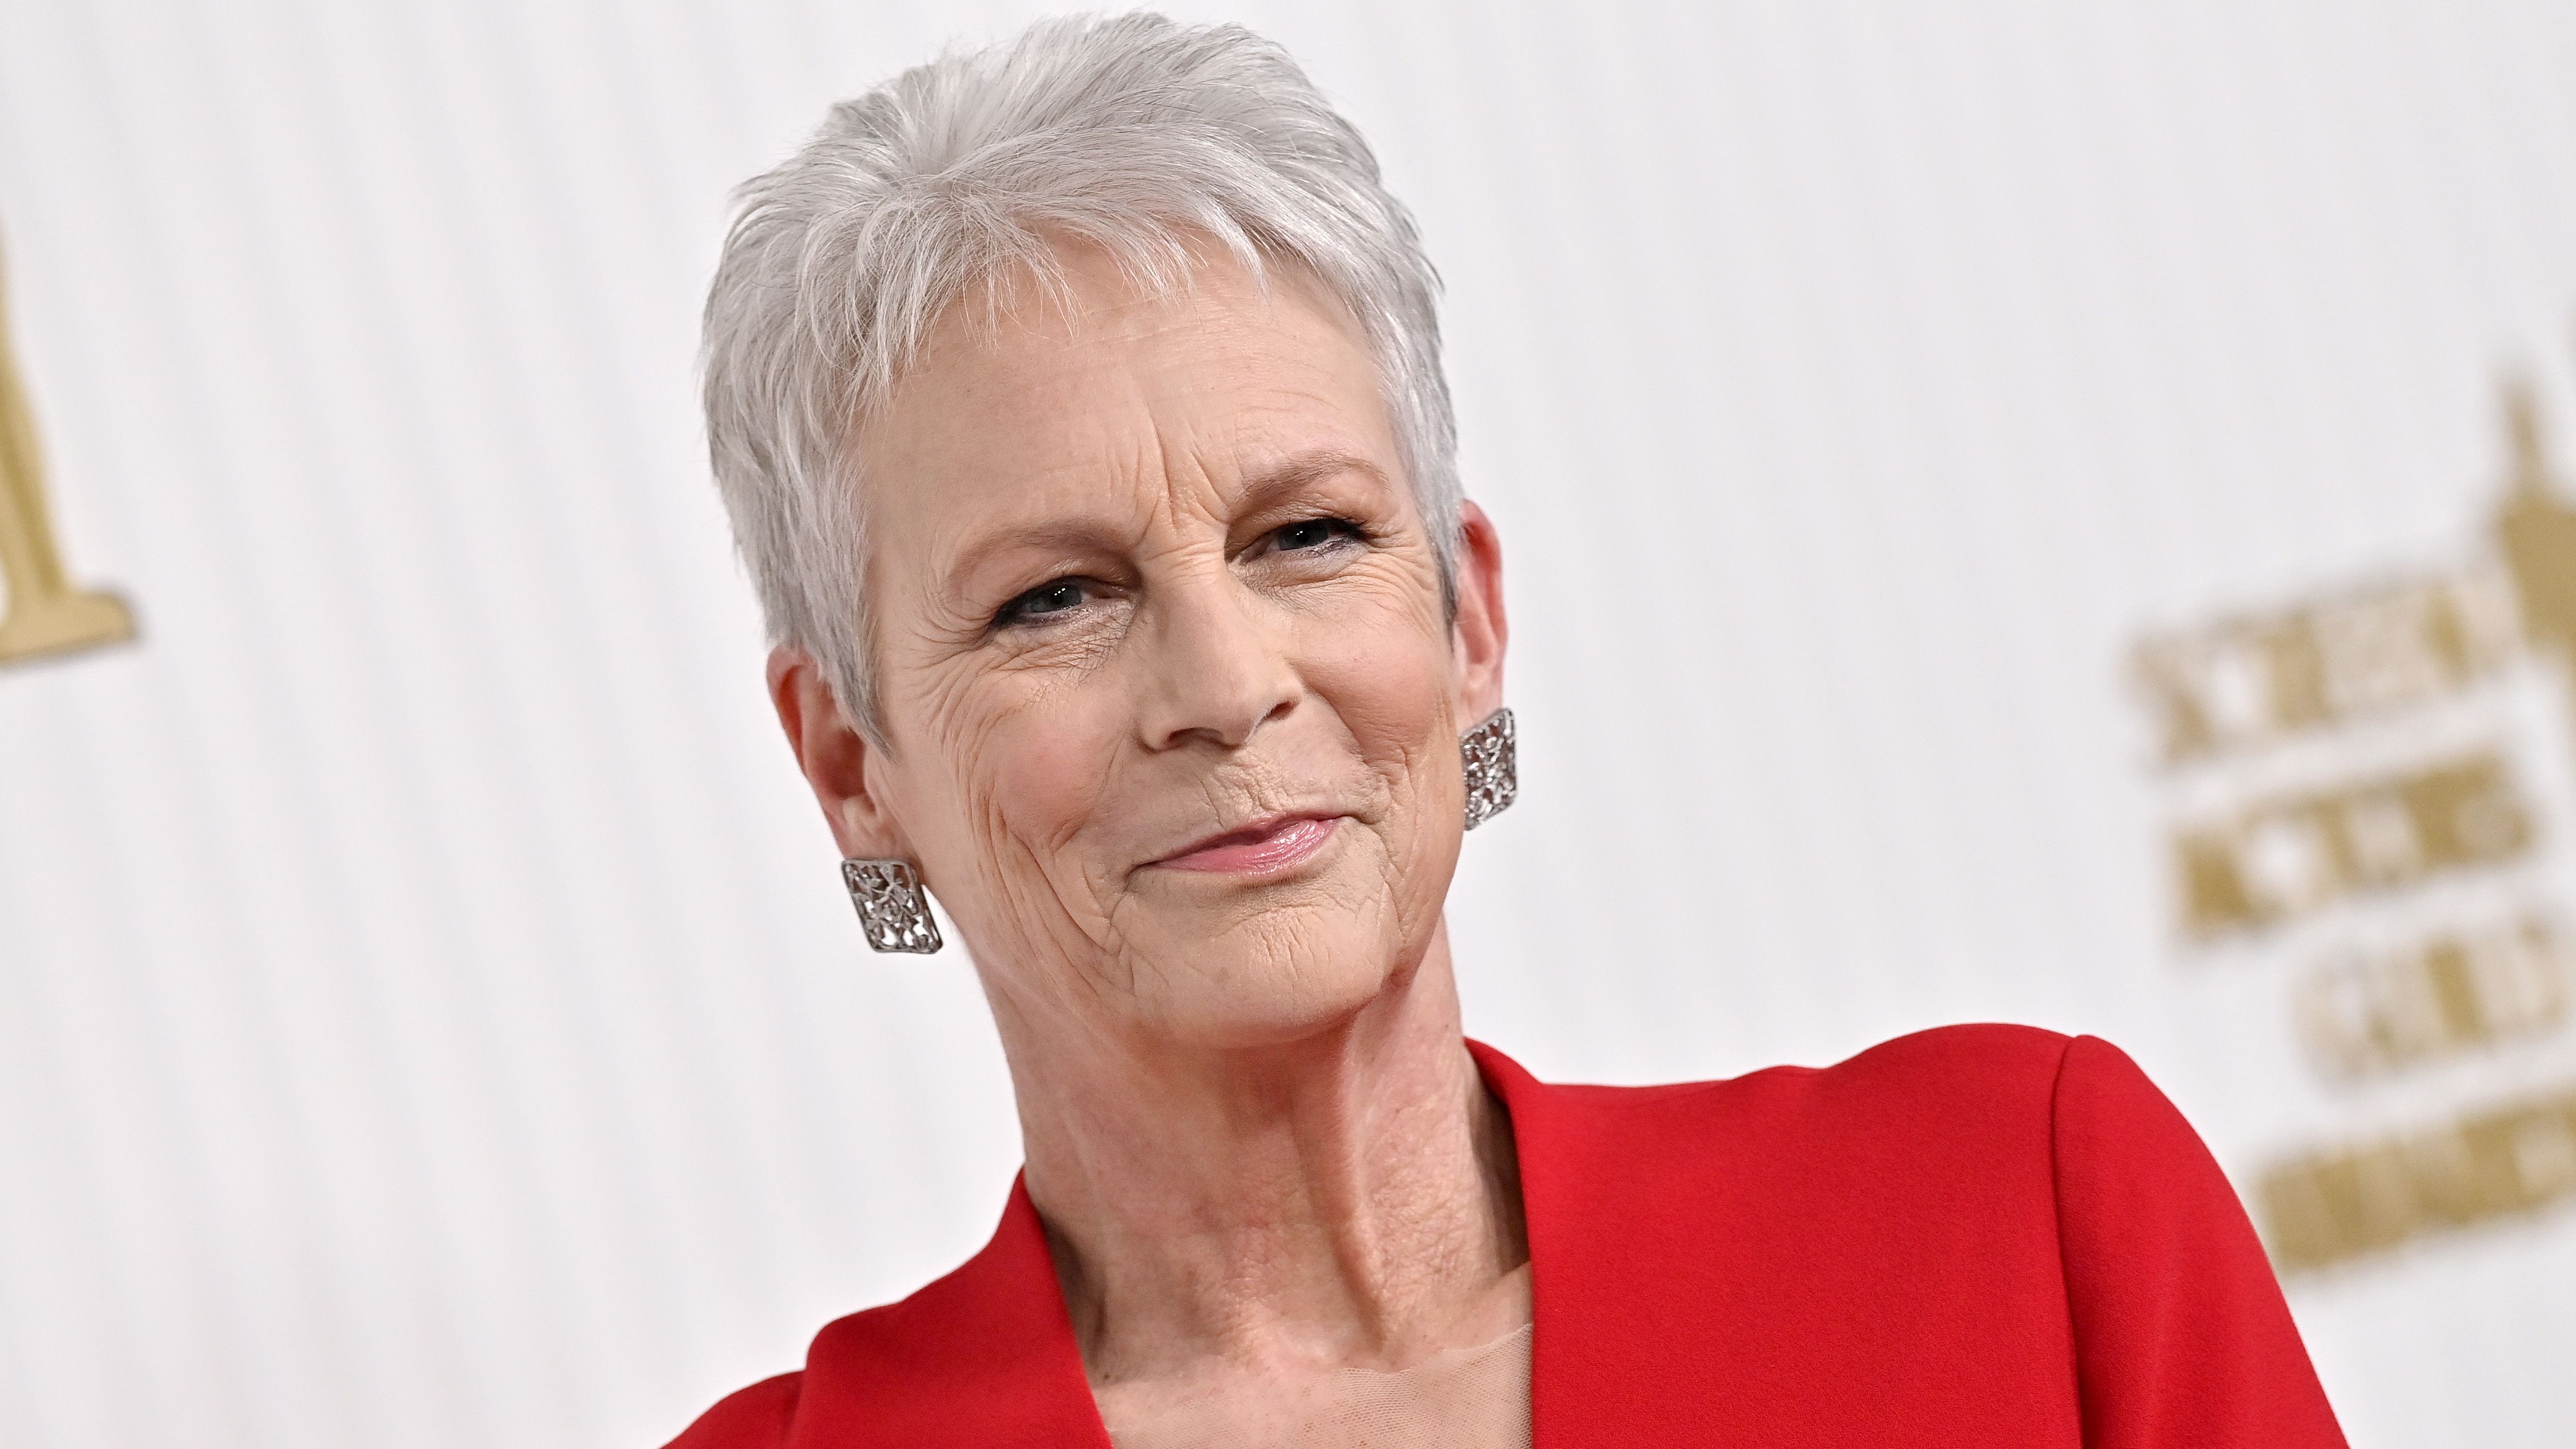 Everything Everywhere All at Once' Star Jamie Lee Curtis Wows in a Plunging  Red Dress